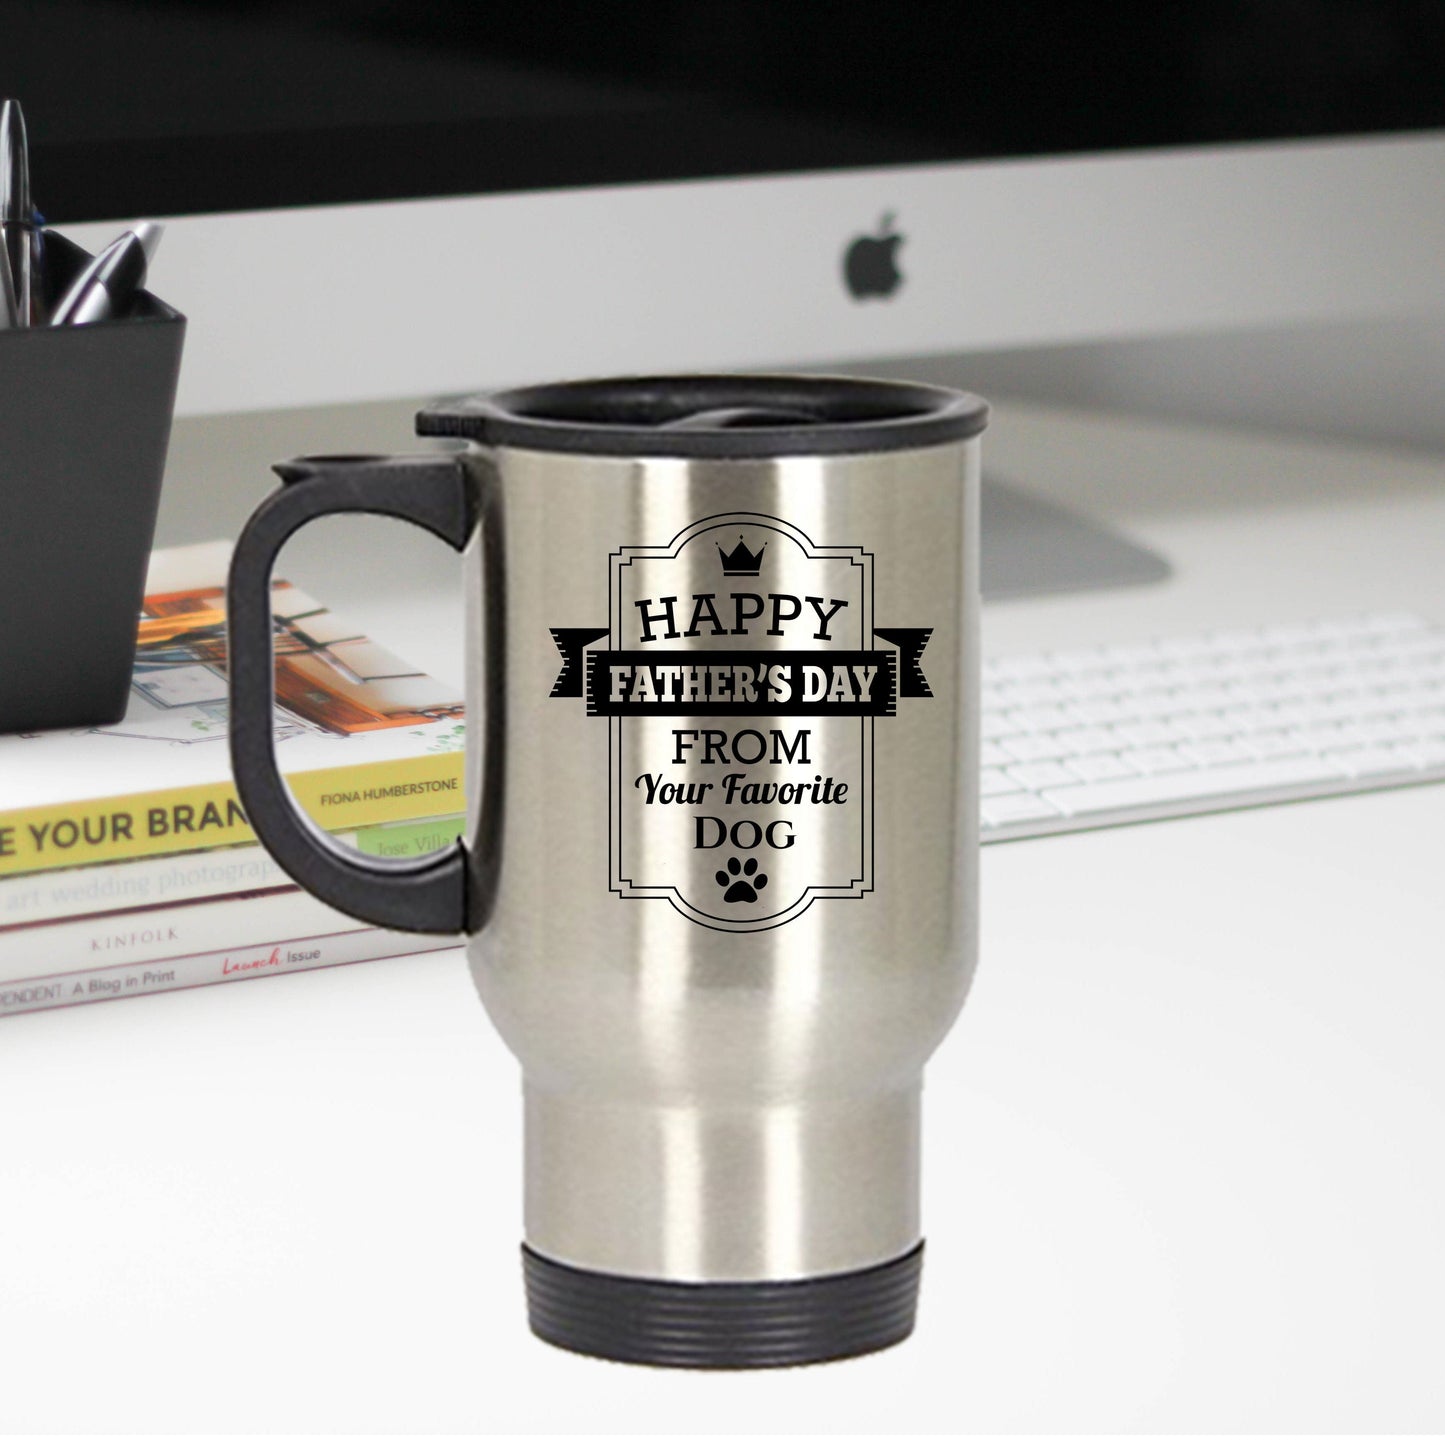 Father's Day Travel Mug from Favorite Dog